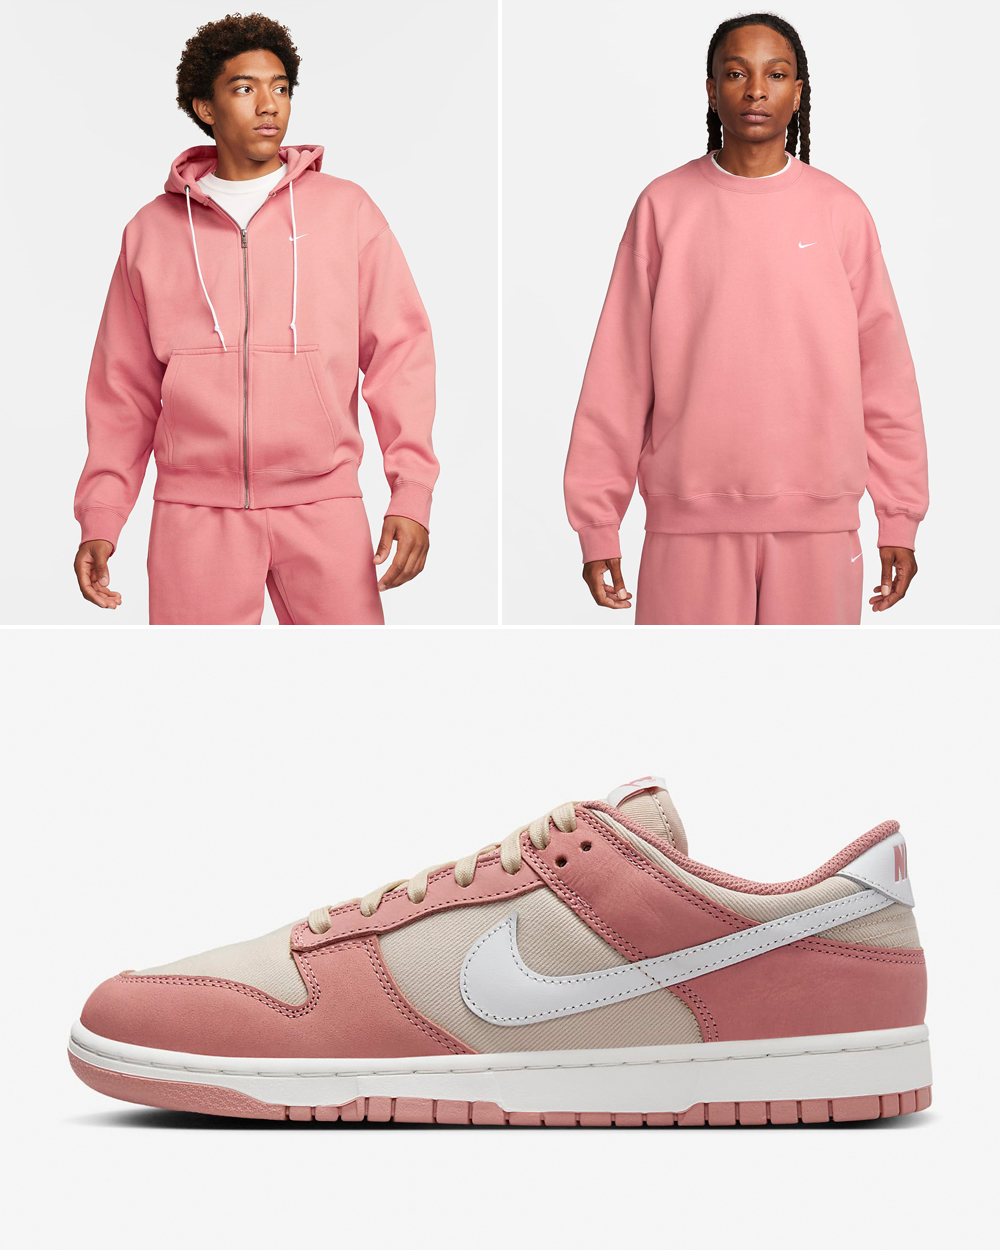 Nike-Dunk-Low-Red-Stardust-Matching-Clothing